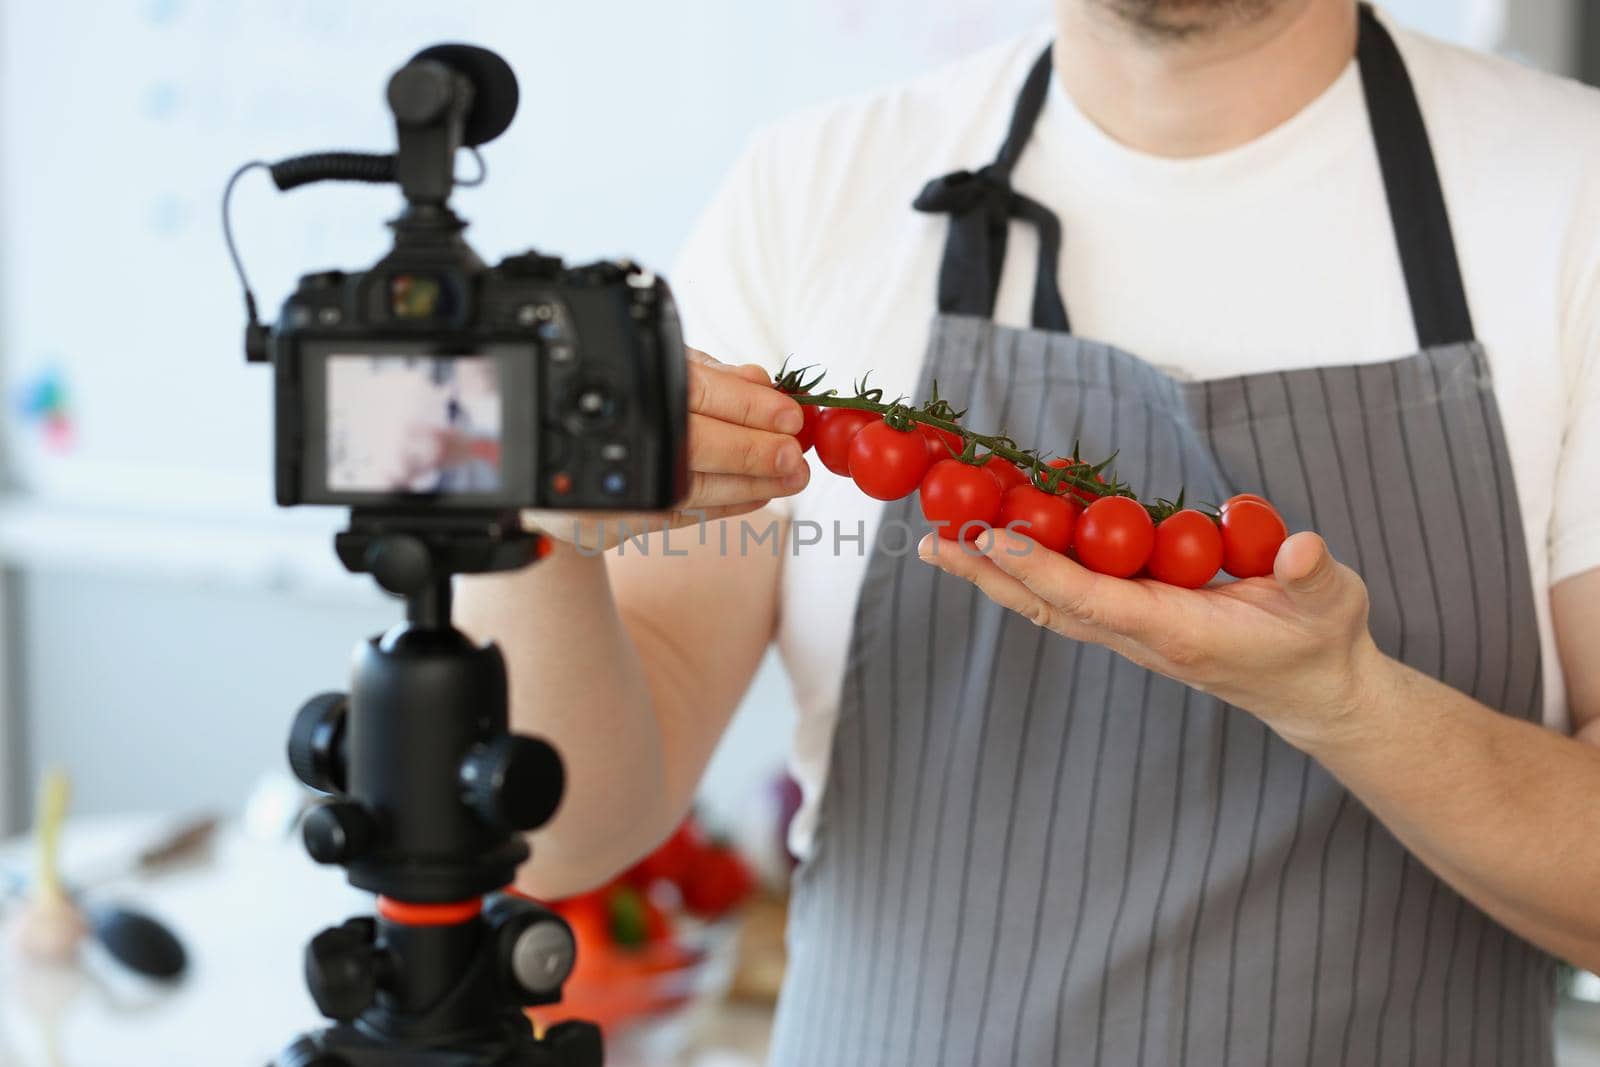 Vlogger chef showing ripe tomatoes ingredient, man in apron recording red vegetable by kuprevich